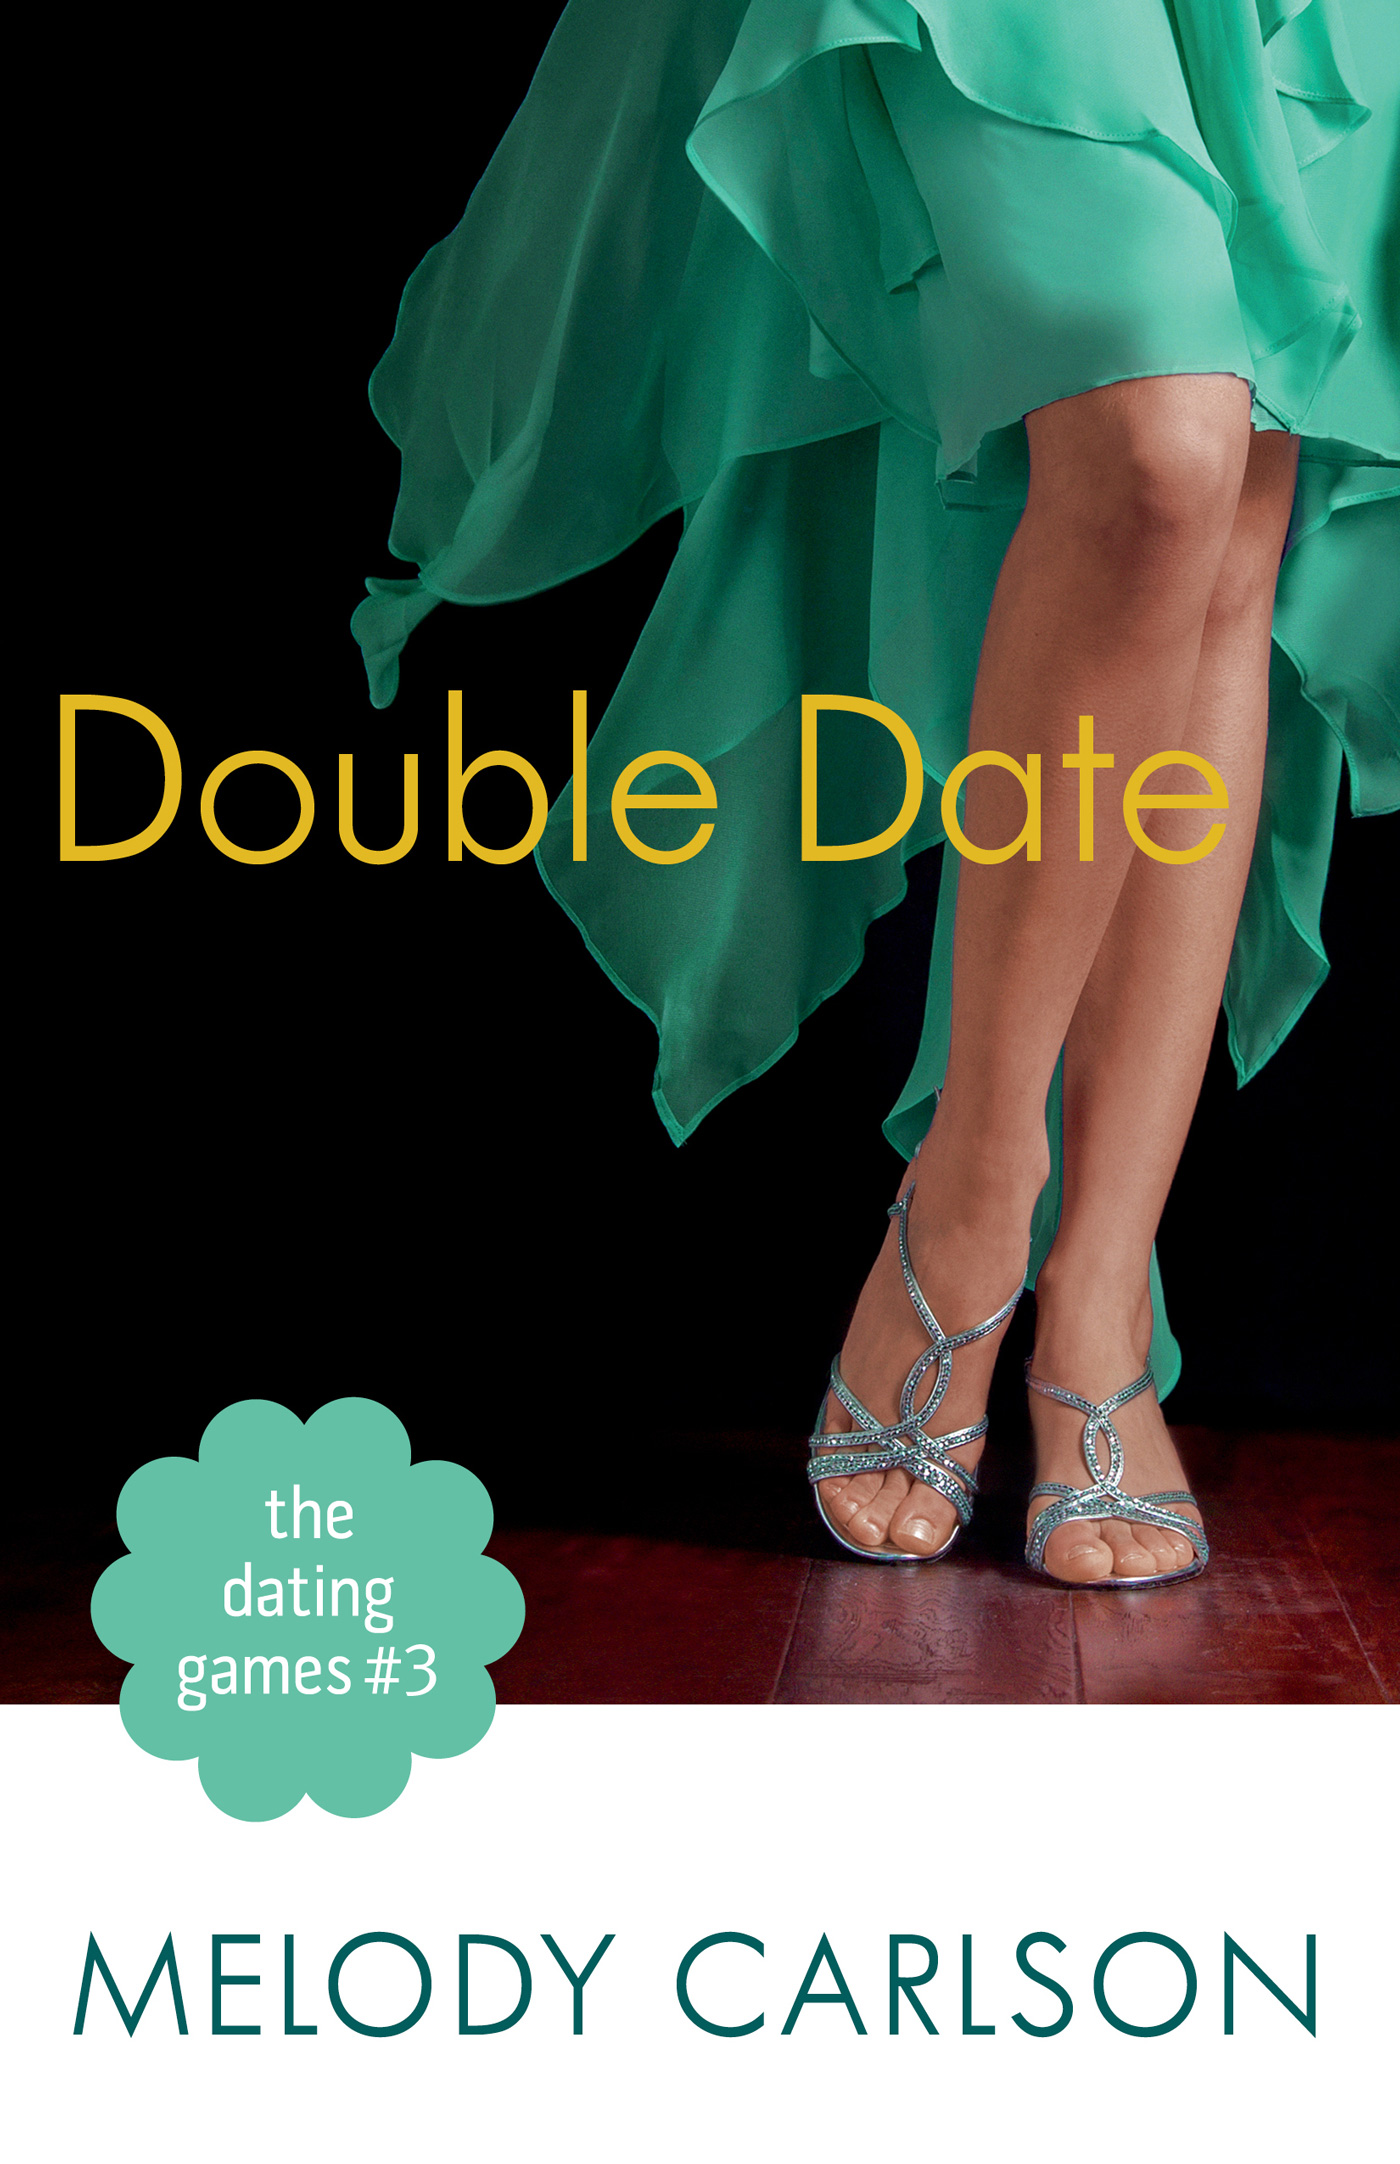 Double Date (2014) by Melody Carlson